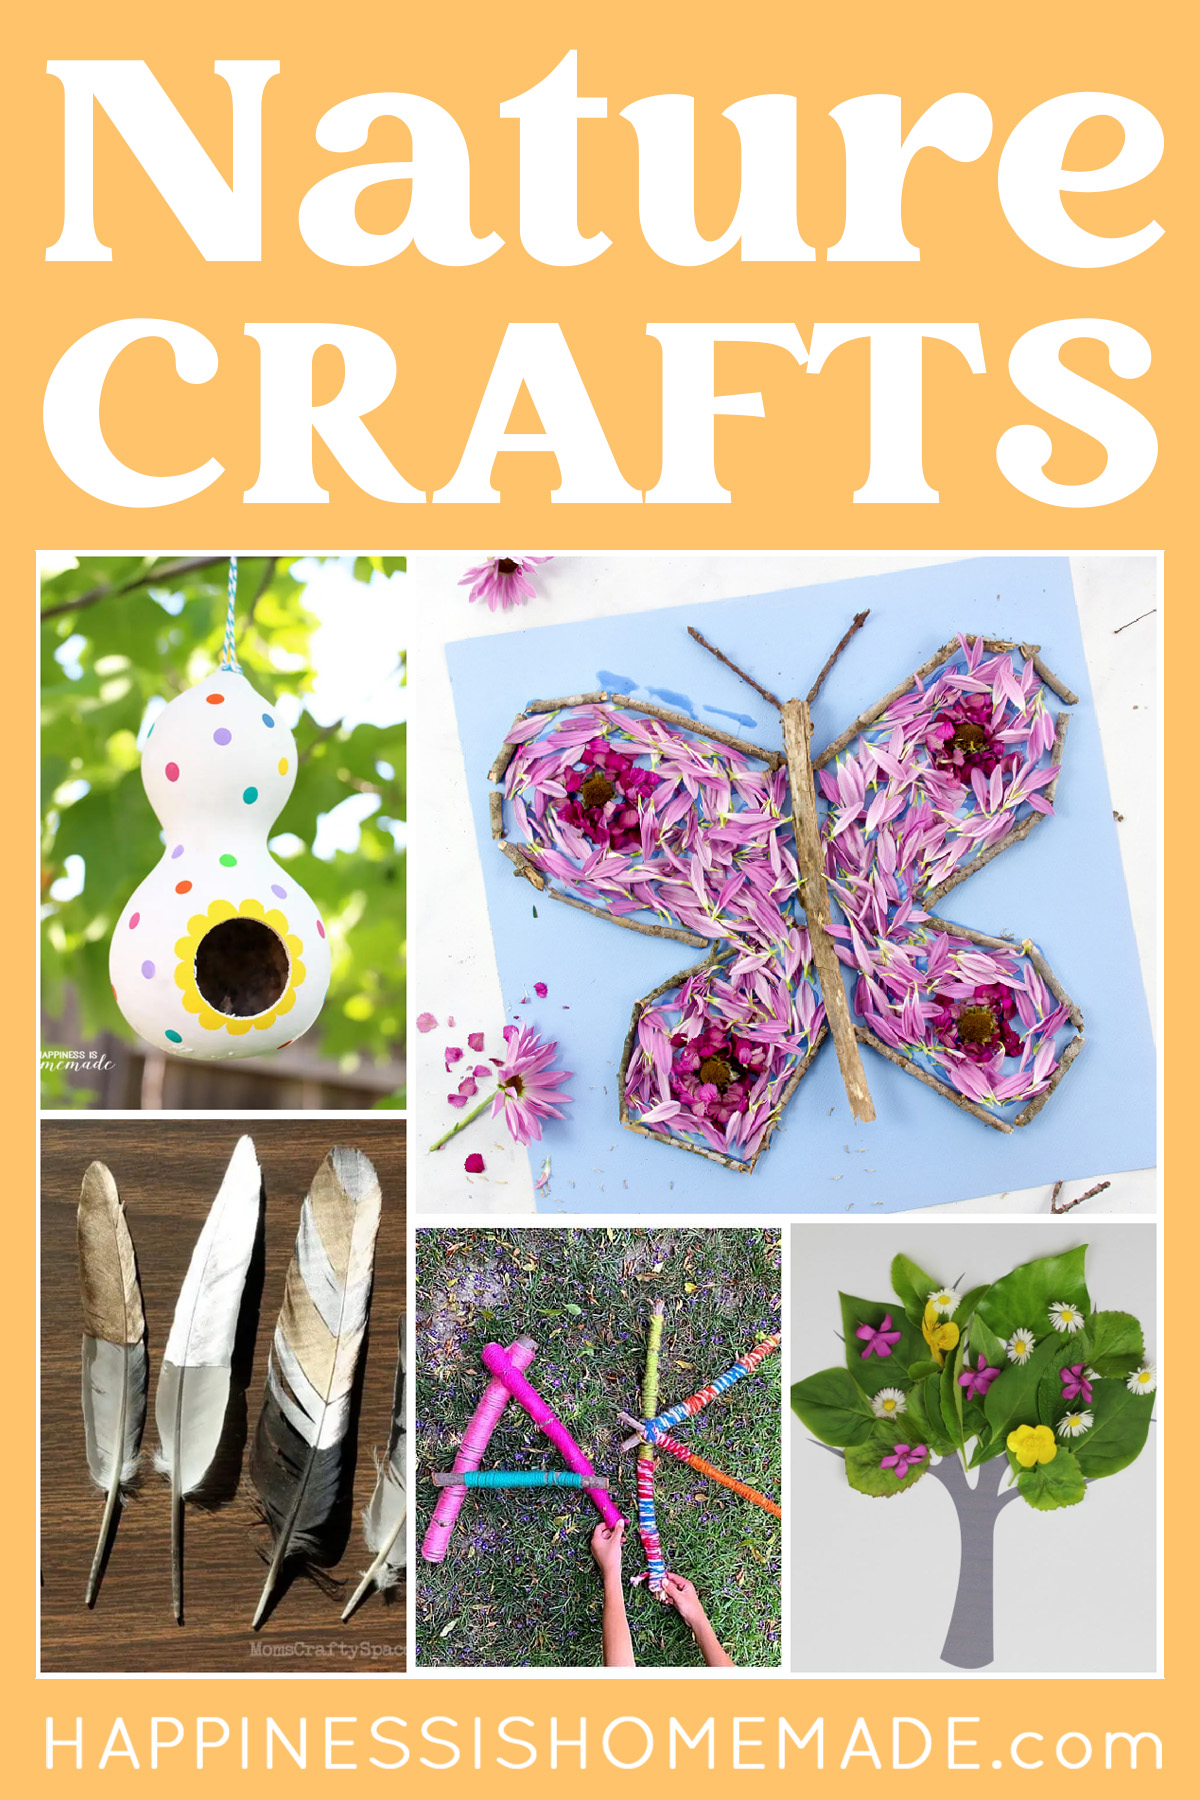 4 Kid-Friendly Yarn Crafts for All Ages - Dot Com Women